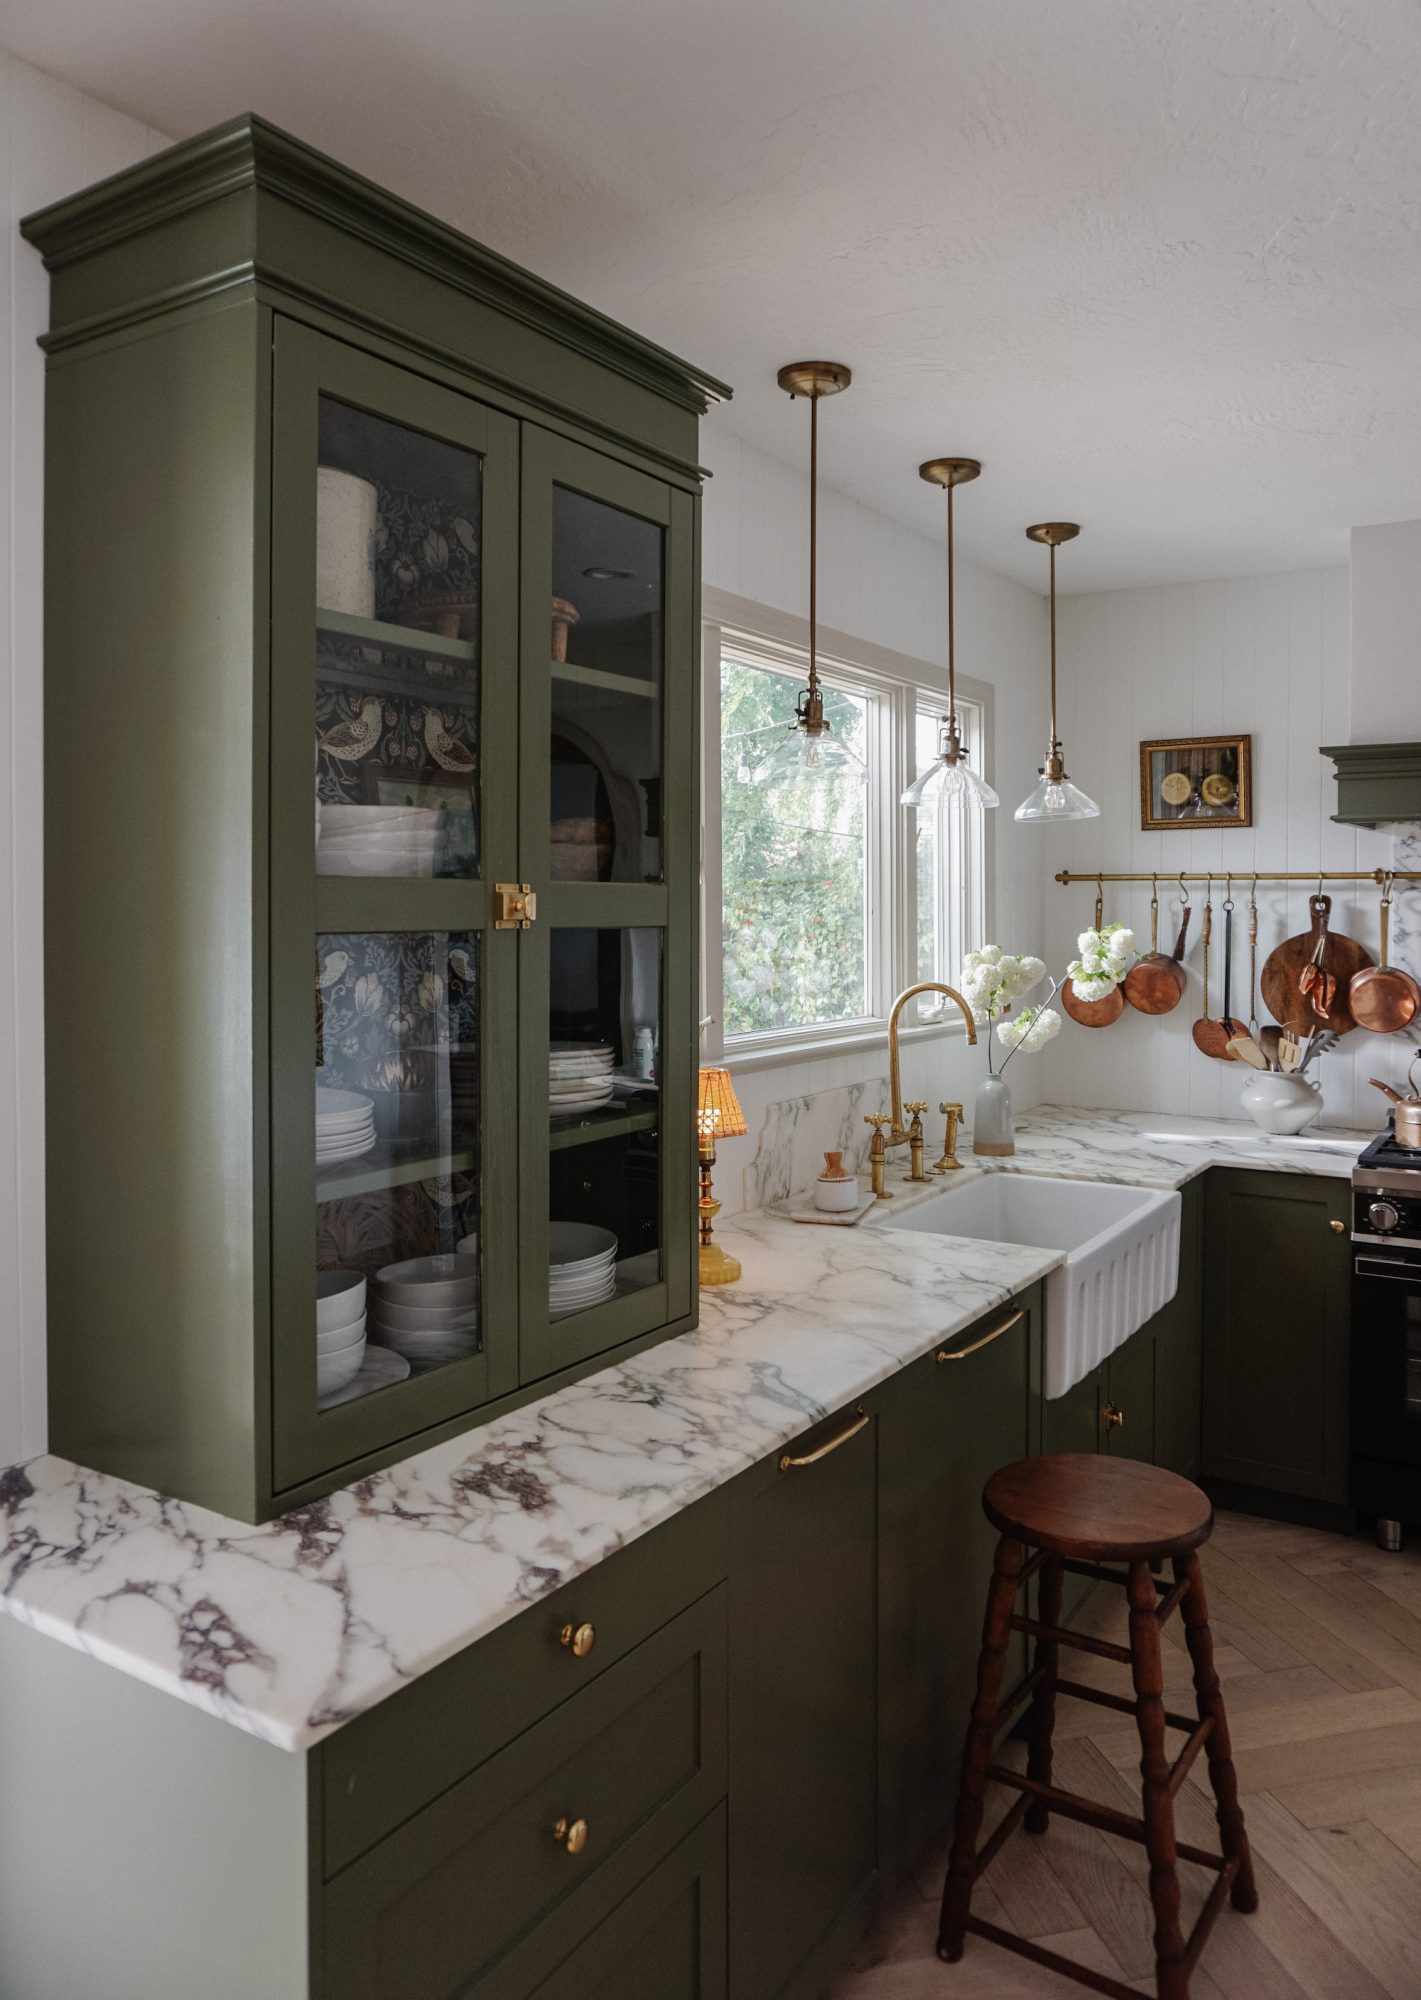 Cottagecore kitchen with sage green cabinets and hanging pendant lamps over farmhouse sink